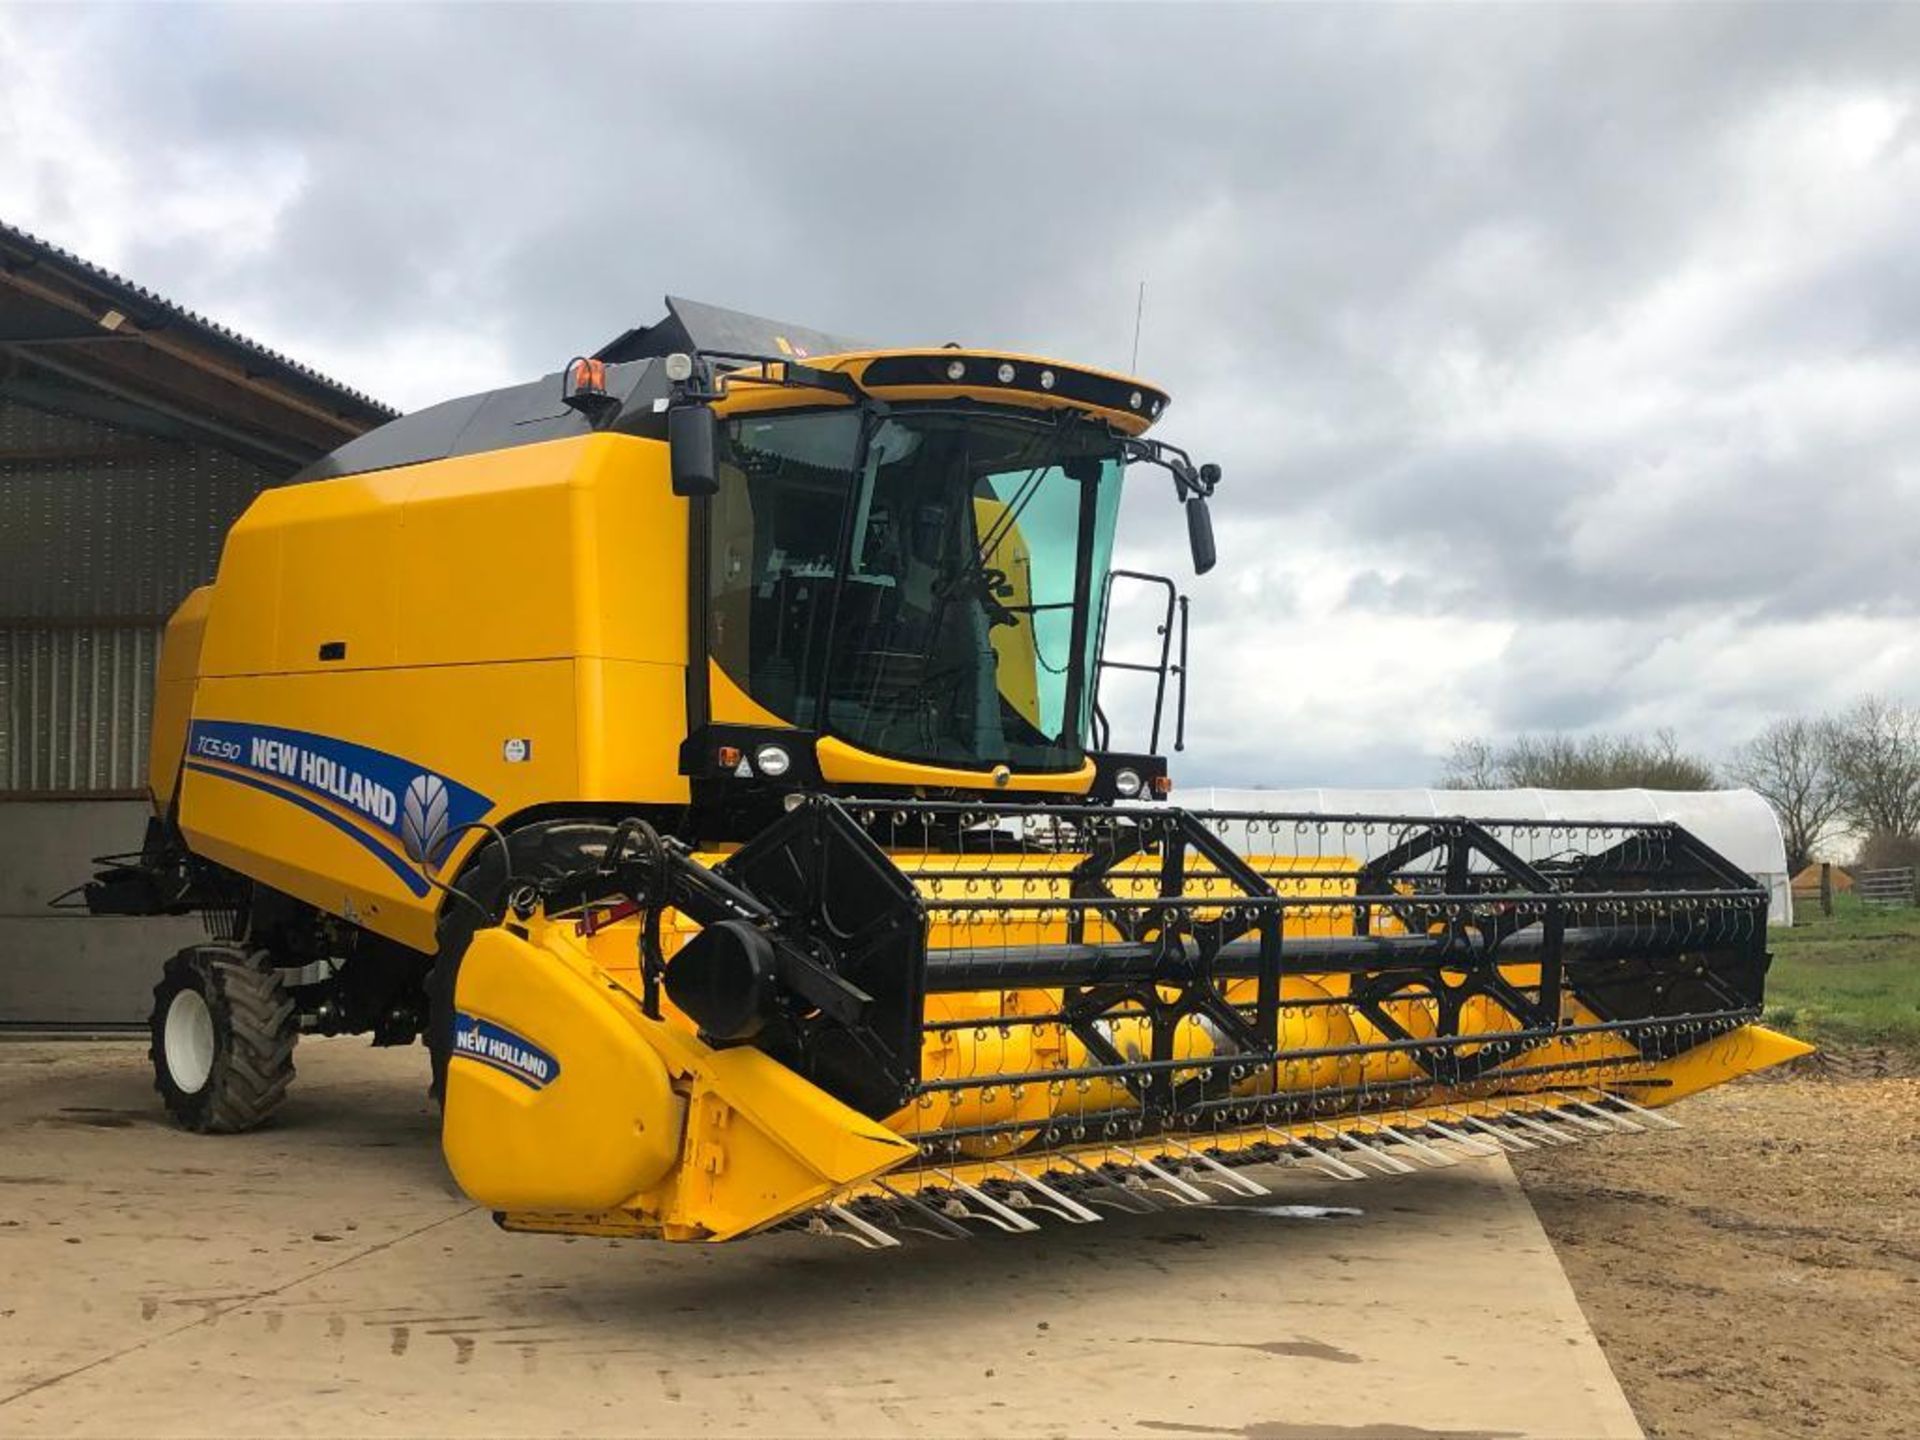 2018 New Holland TC5.90 combine harvester with straw chopper and Ceres 8000i grain monitoring system - Image 14 of 35